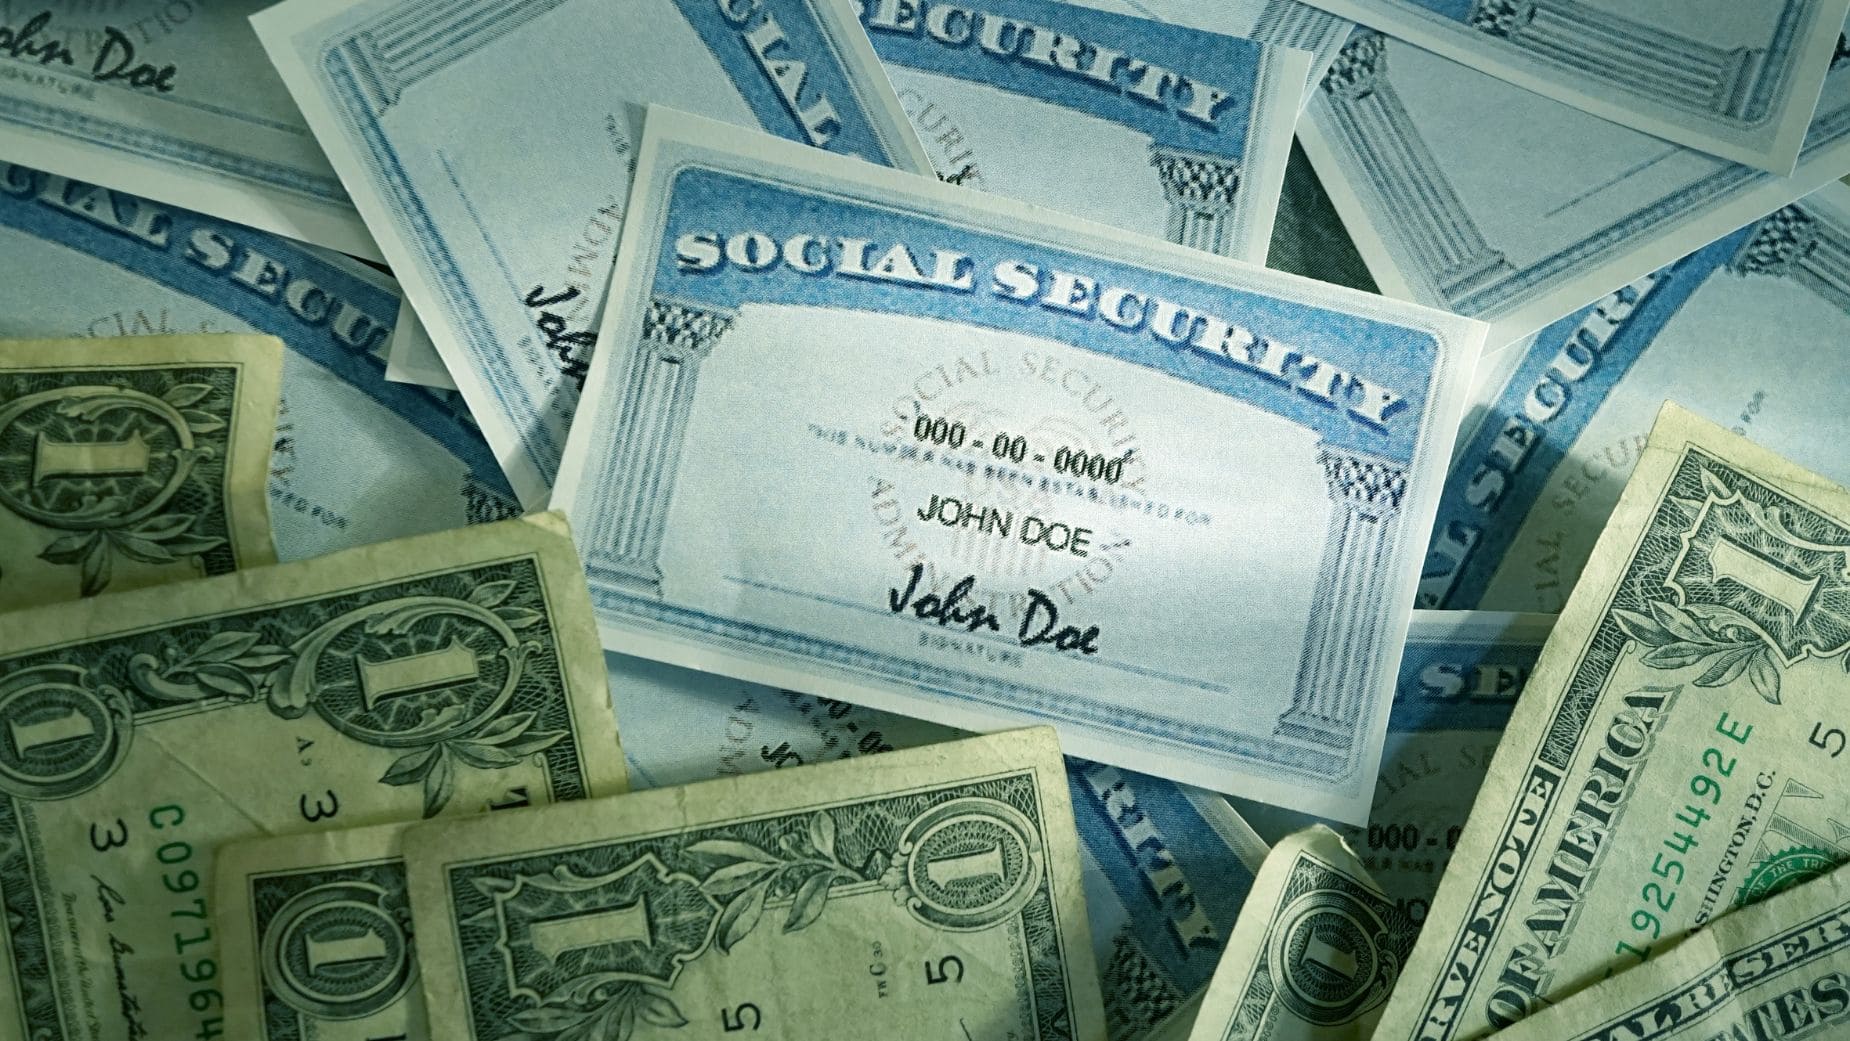 Contact your bank before contacting the Social Security Administration